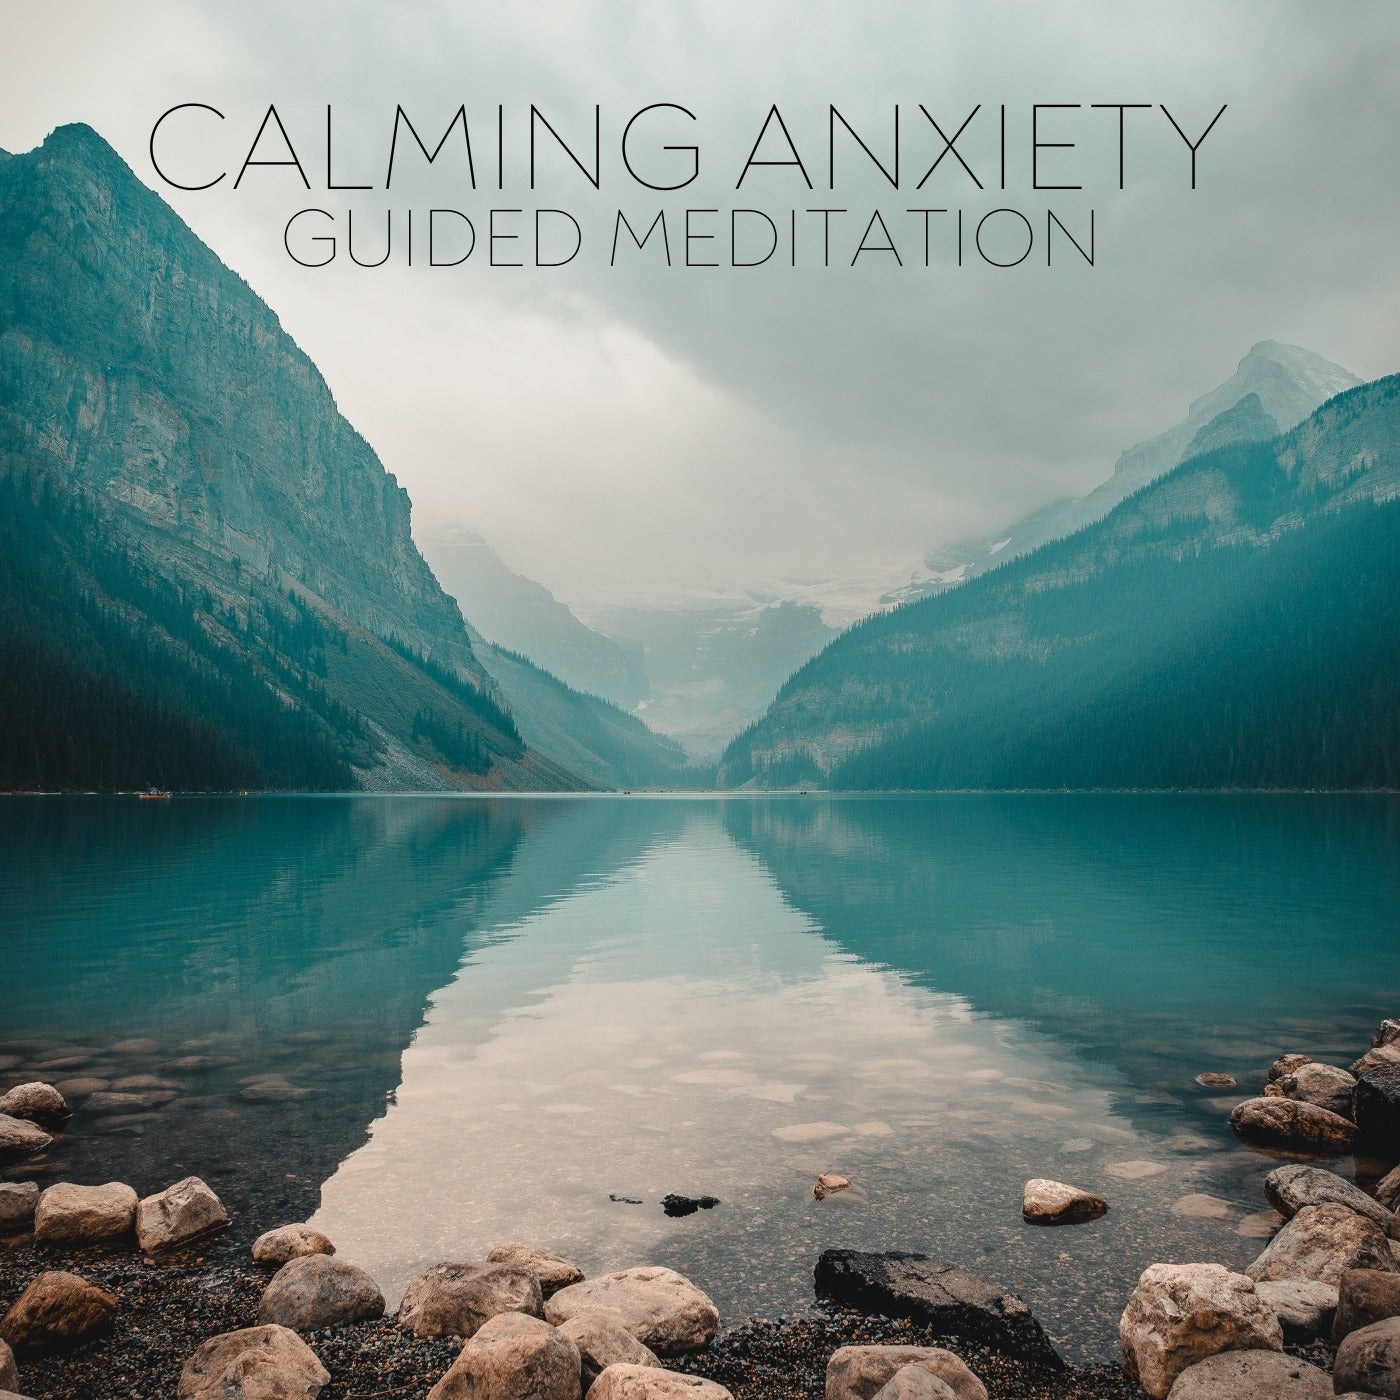 Anxiety Calming Backgrounds